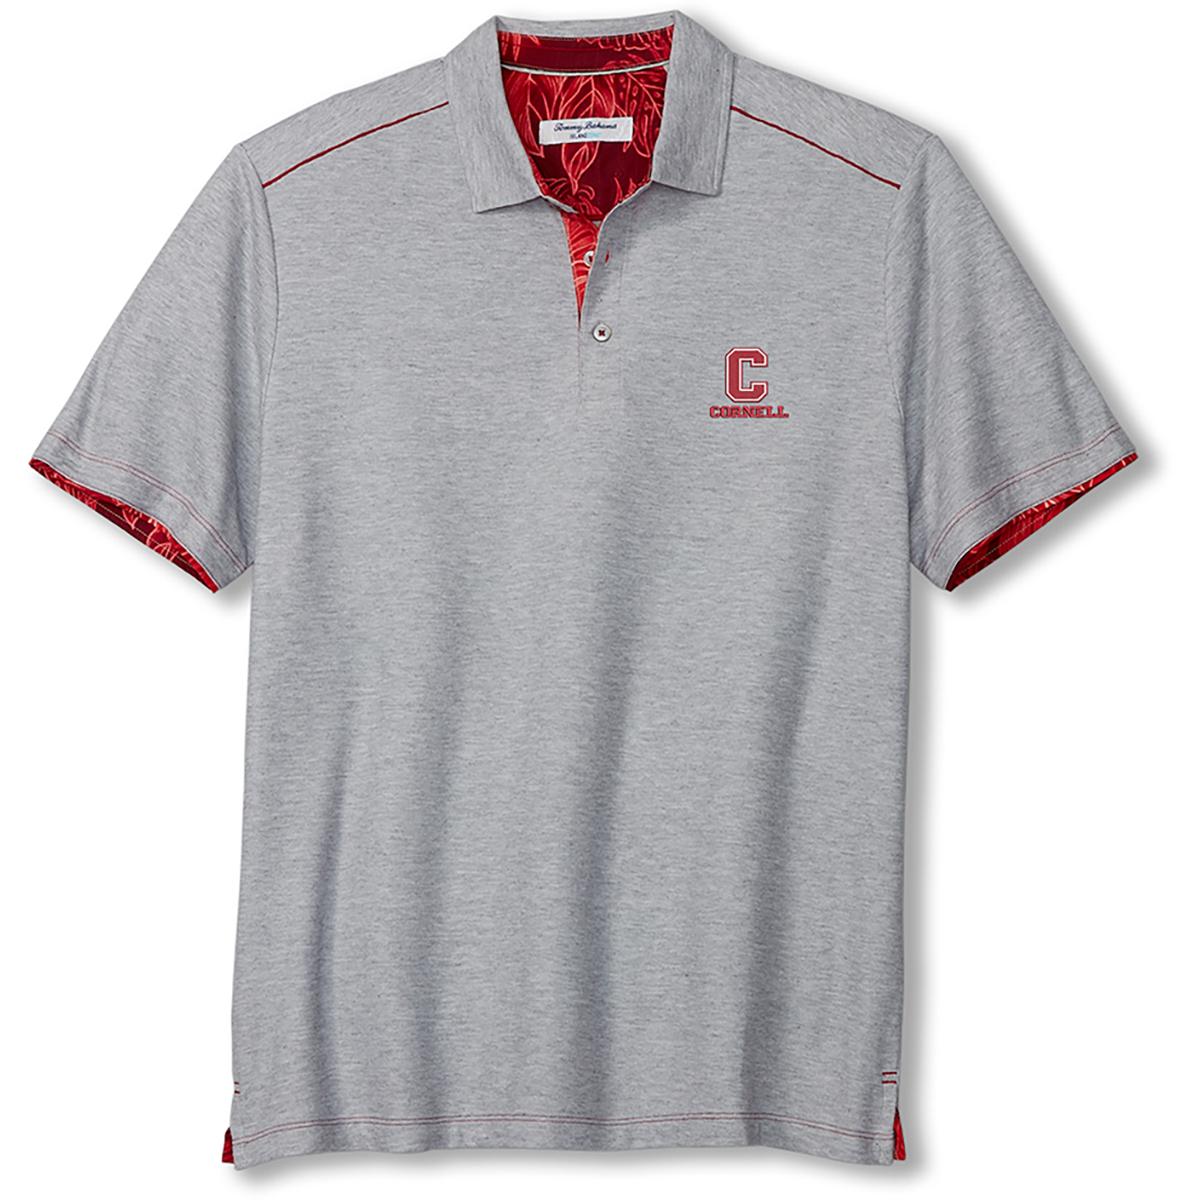 Tommy Bahama Block C over Cornell T